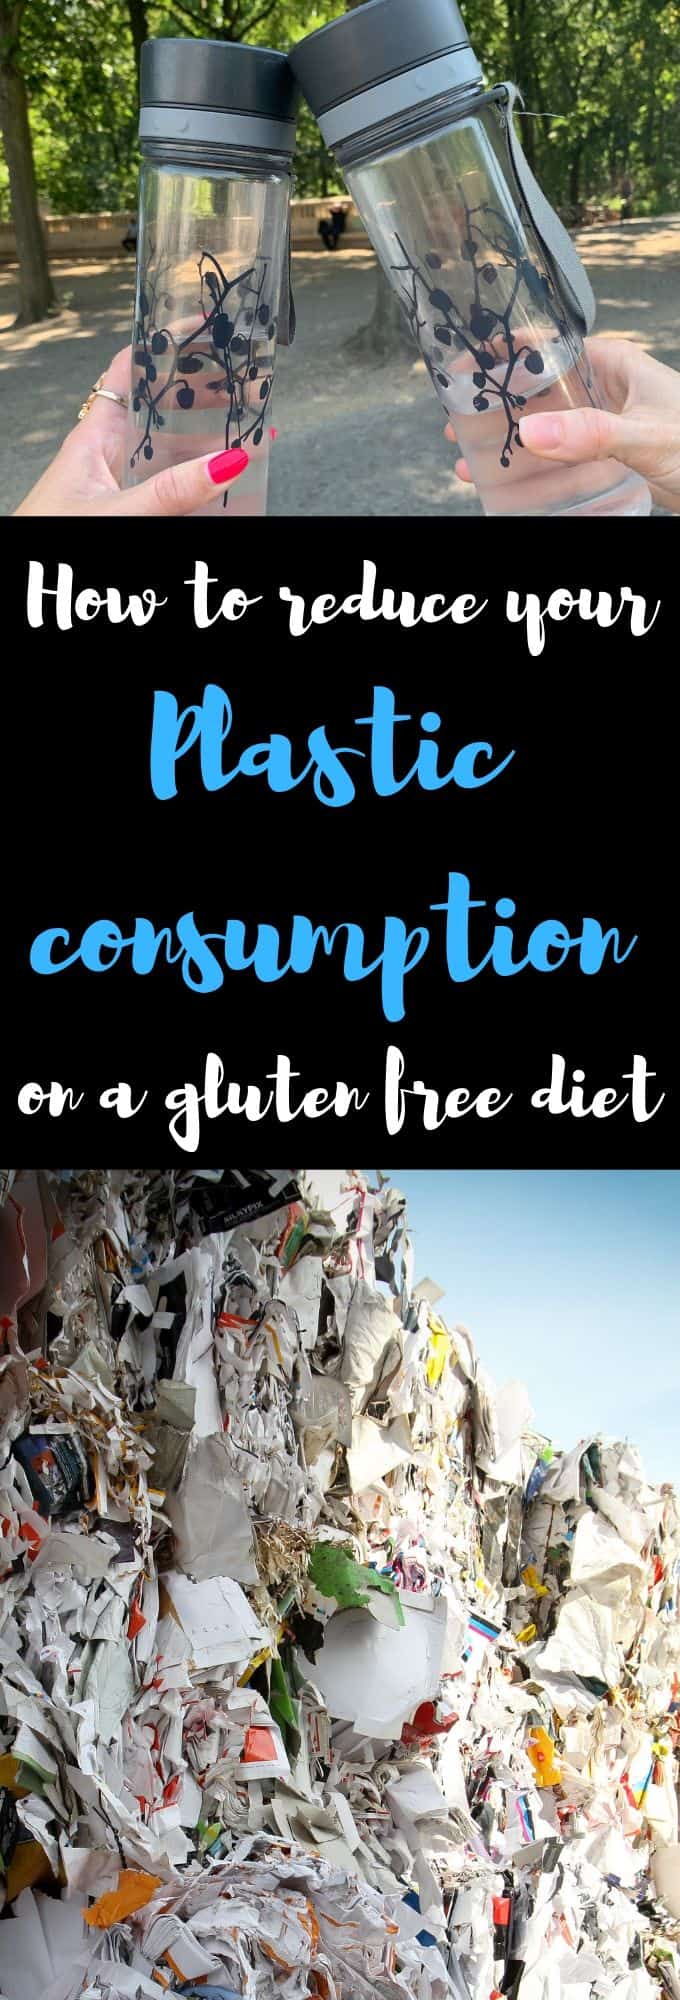 how to reduce plastic consumtion on a gluten free diet